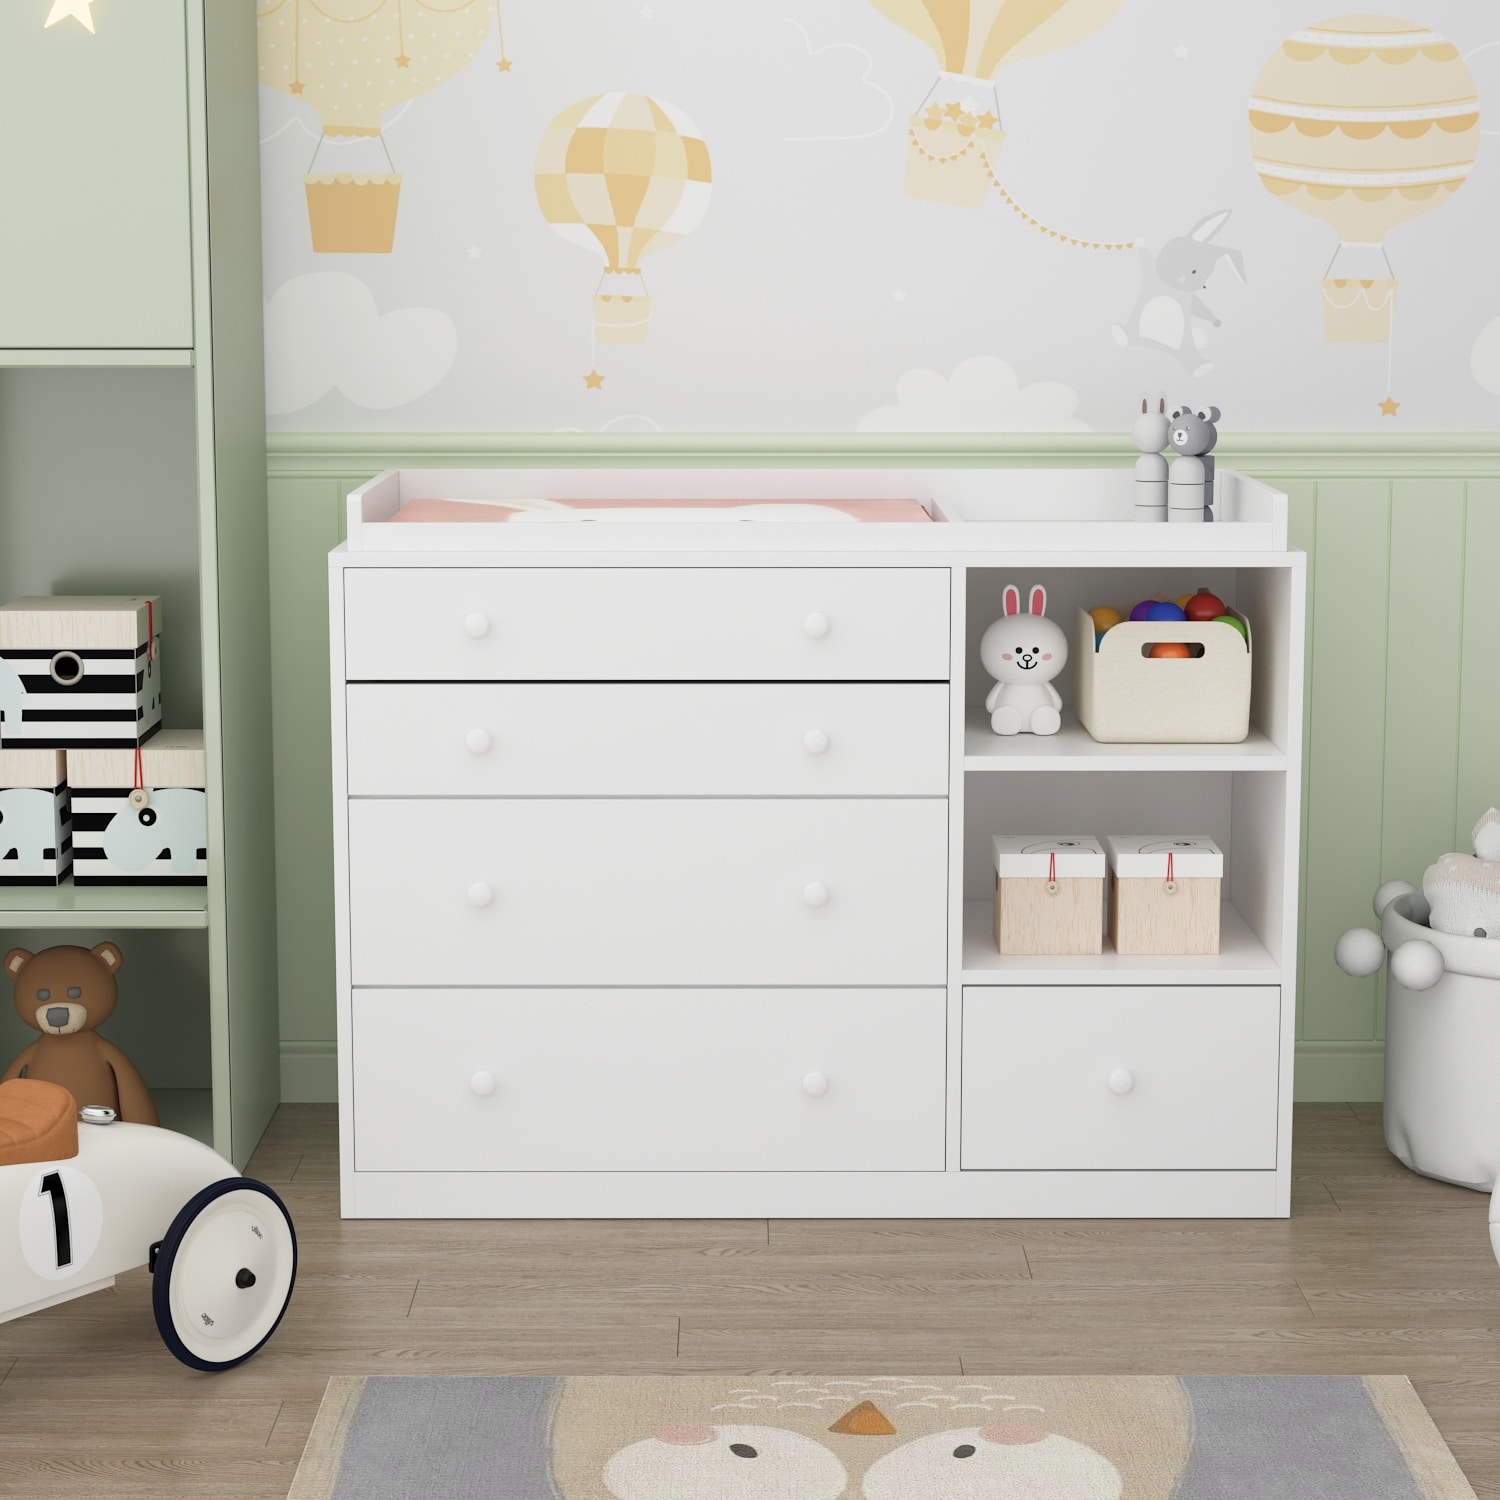 https://ak1.ostkcdn.com/images/products/is/images/direct/56d89098fd1205a024c3e7d314994363a9707e34/Premium-White-5-Drawer-Dresser-with-Baby-Changing-Table-by-Kerrogee.jpg